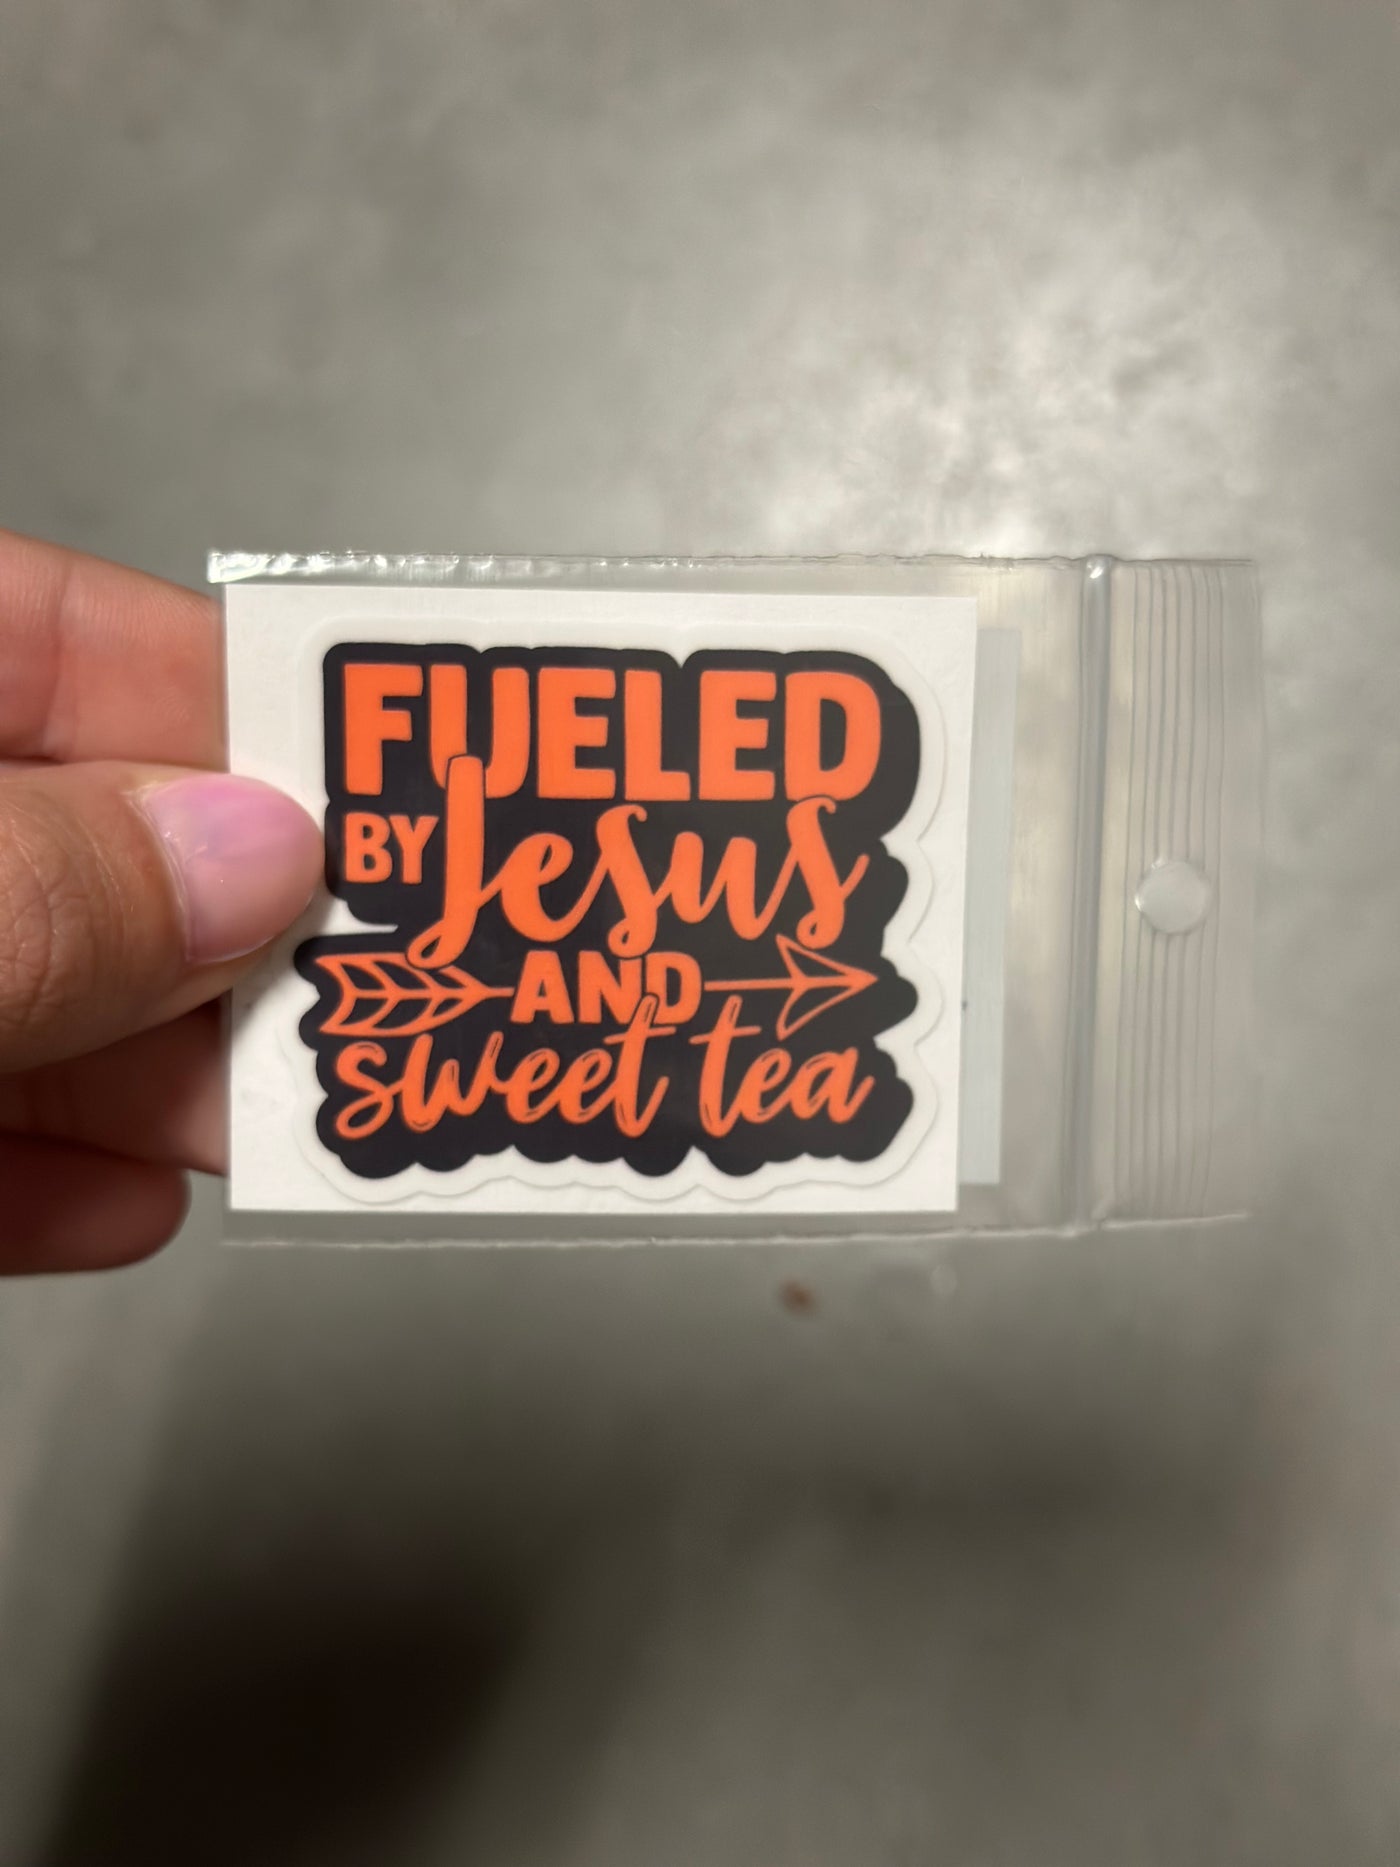 Fueled by Jesus and Sweet Tea sticker